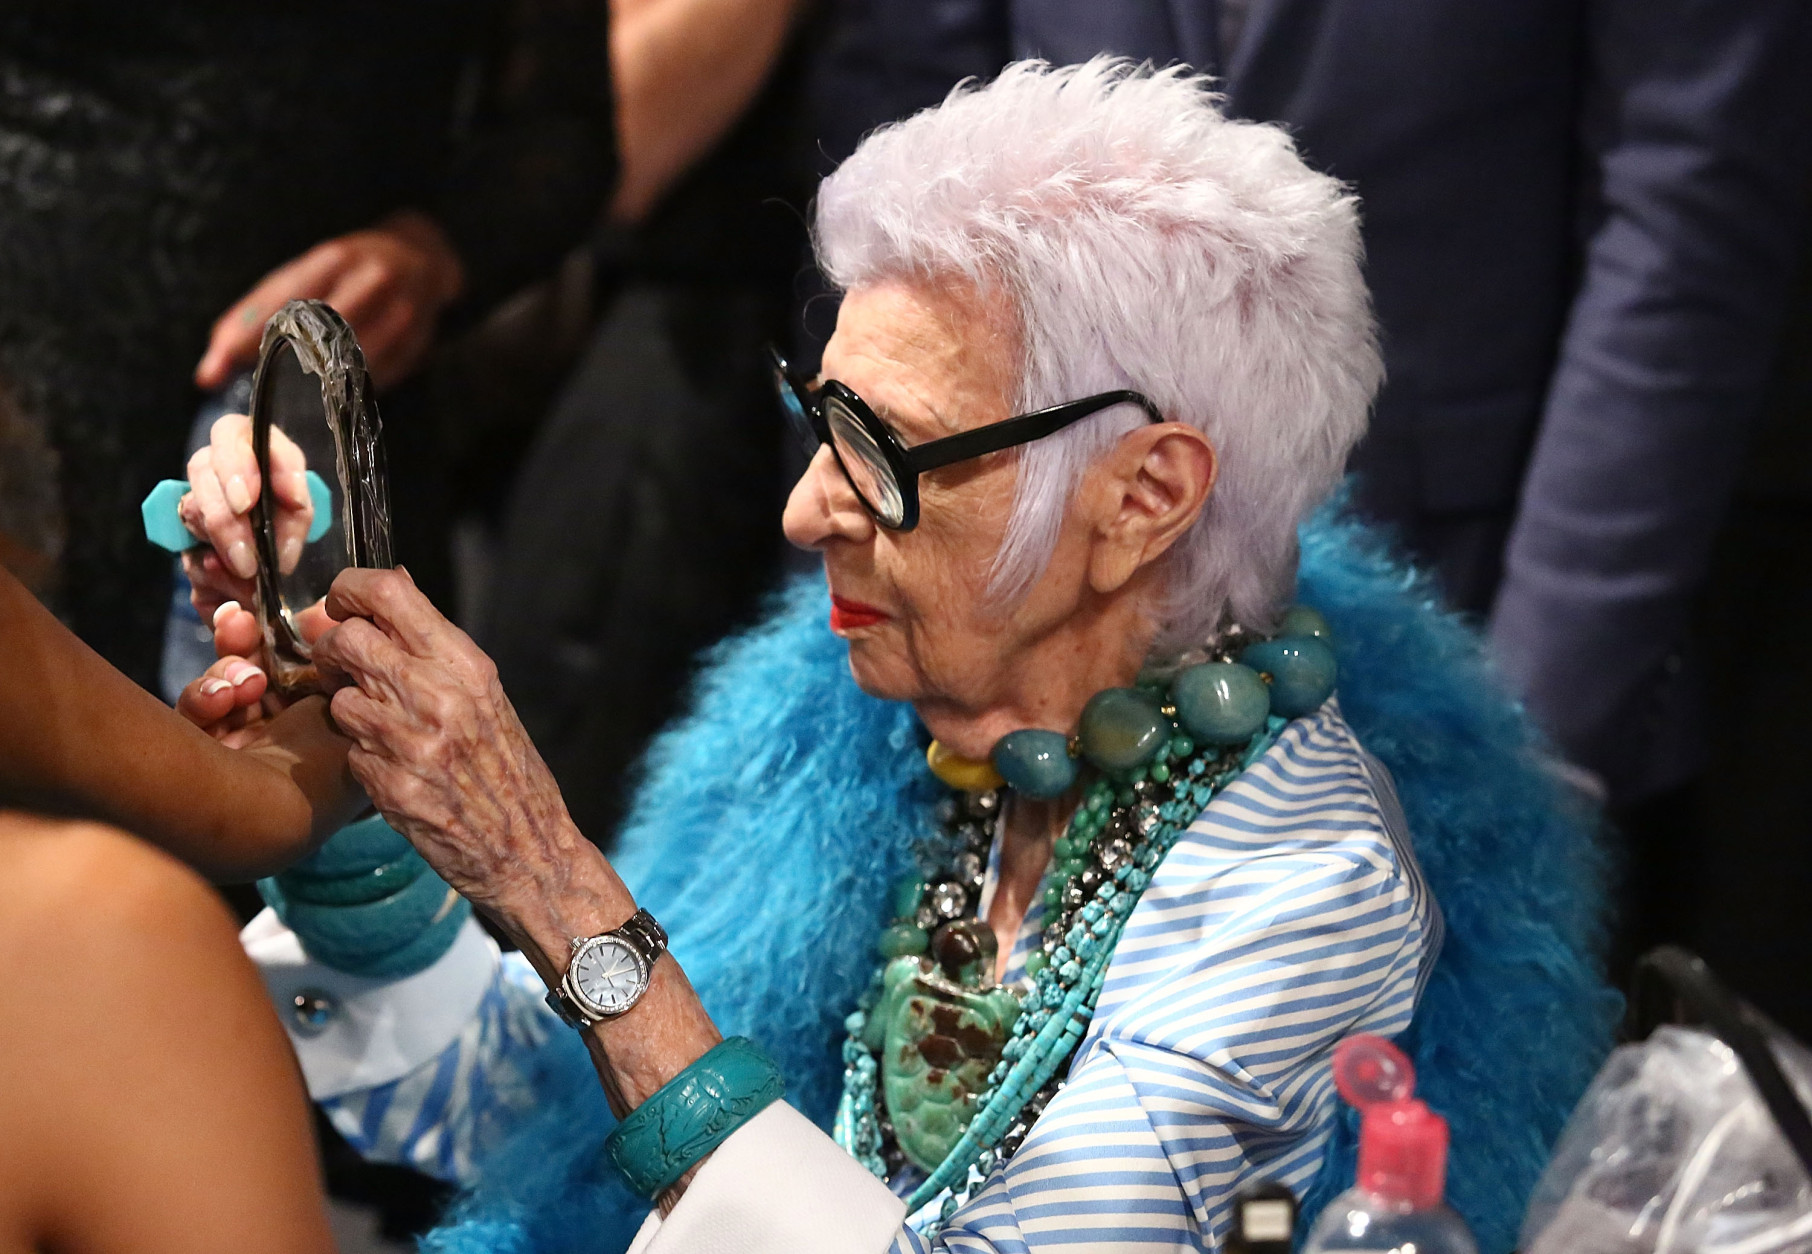 NEW YORK, NY - SEPTEMBER 09:  Iris Apfel poses backstage at Monse - September 2016 - New York Fashion Week at Art Beam on September 9, 2016 in New York City.  (Photo by Astrid Stawiarz/Getty Images)